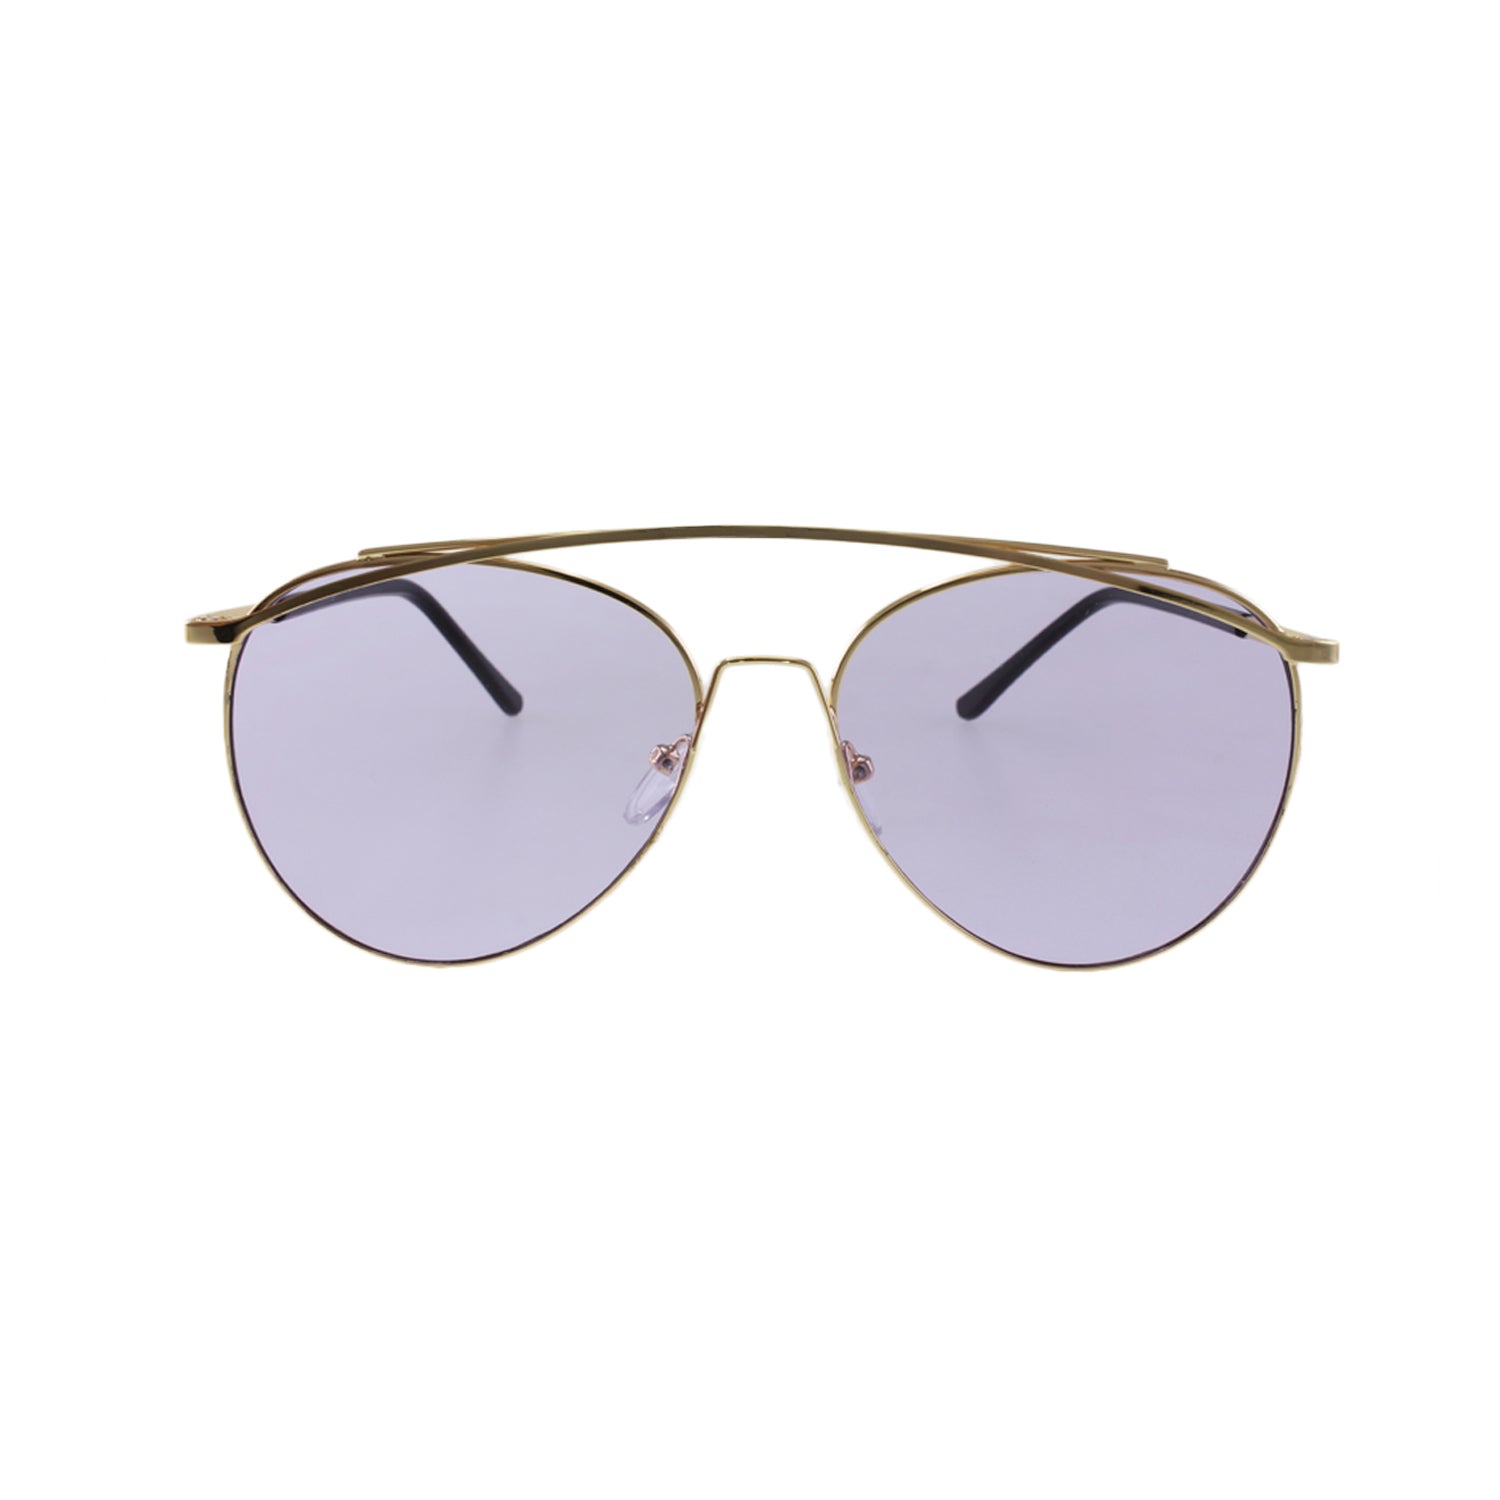 Jase New York Lincoln Sunglasses in Purple - Shop Luxurious57